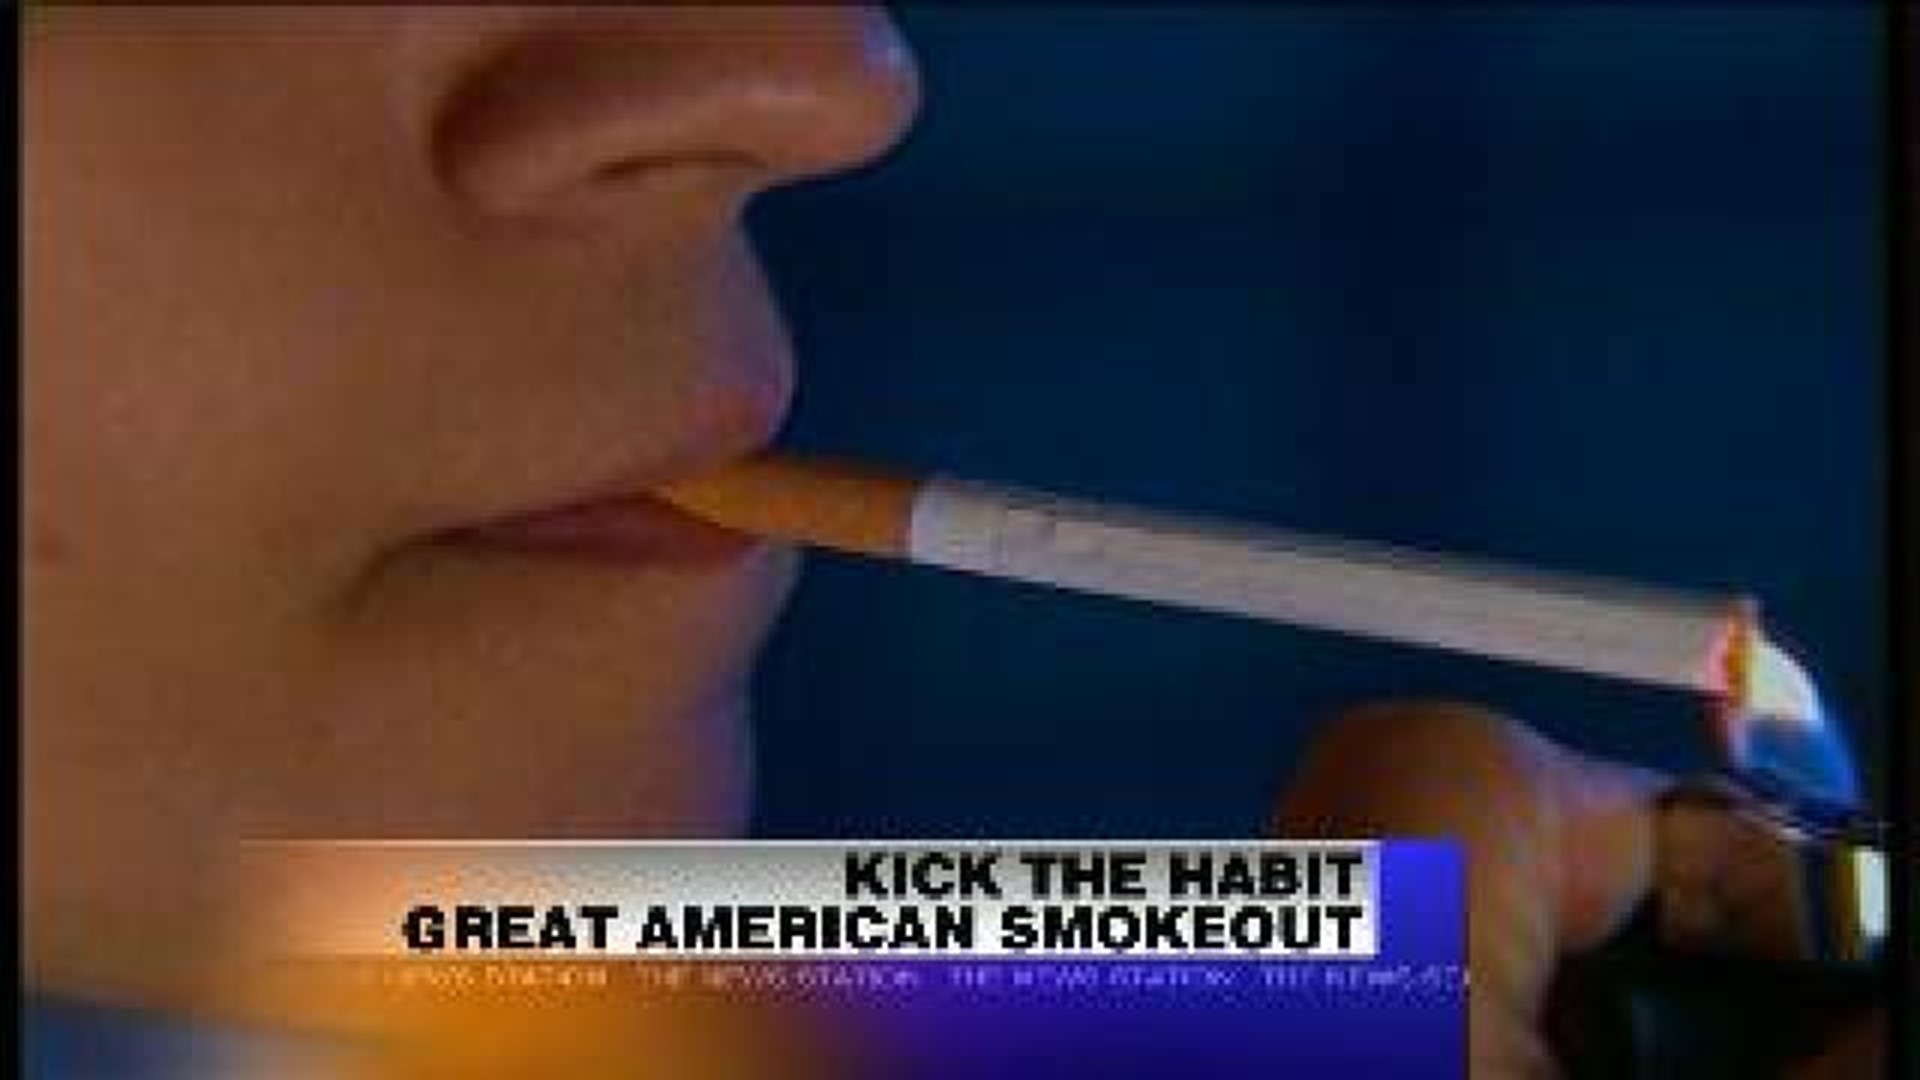 Great American Smokeout: Kids Learn About Health Risks